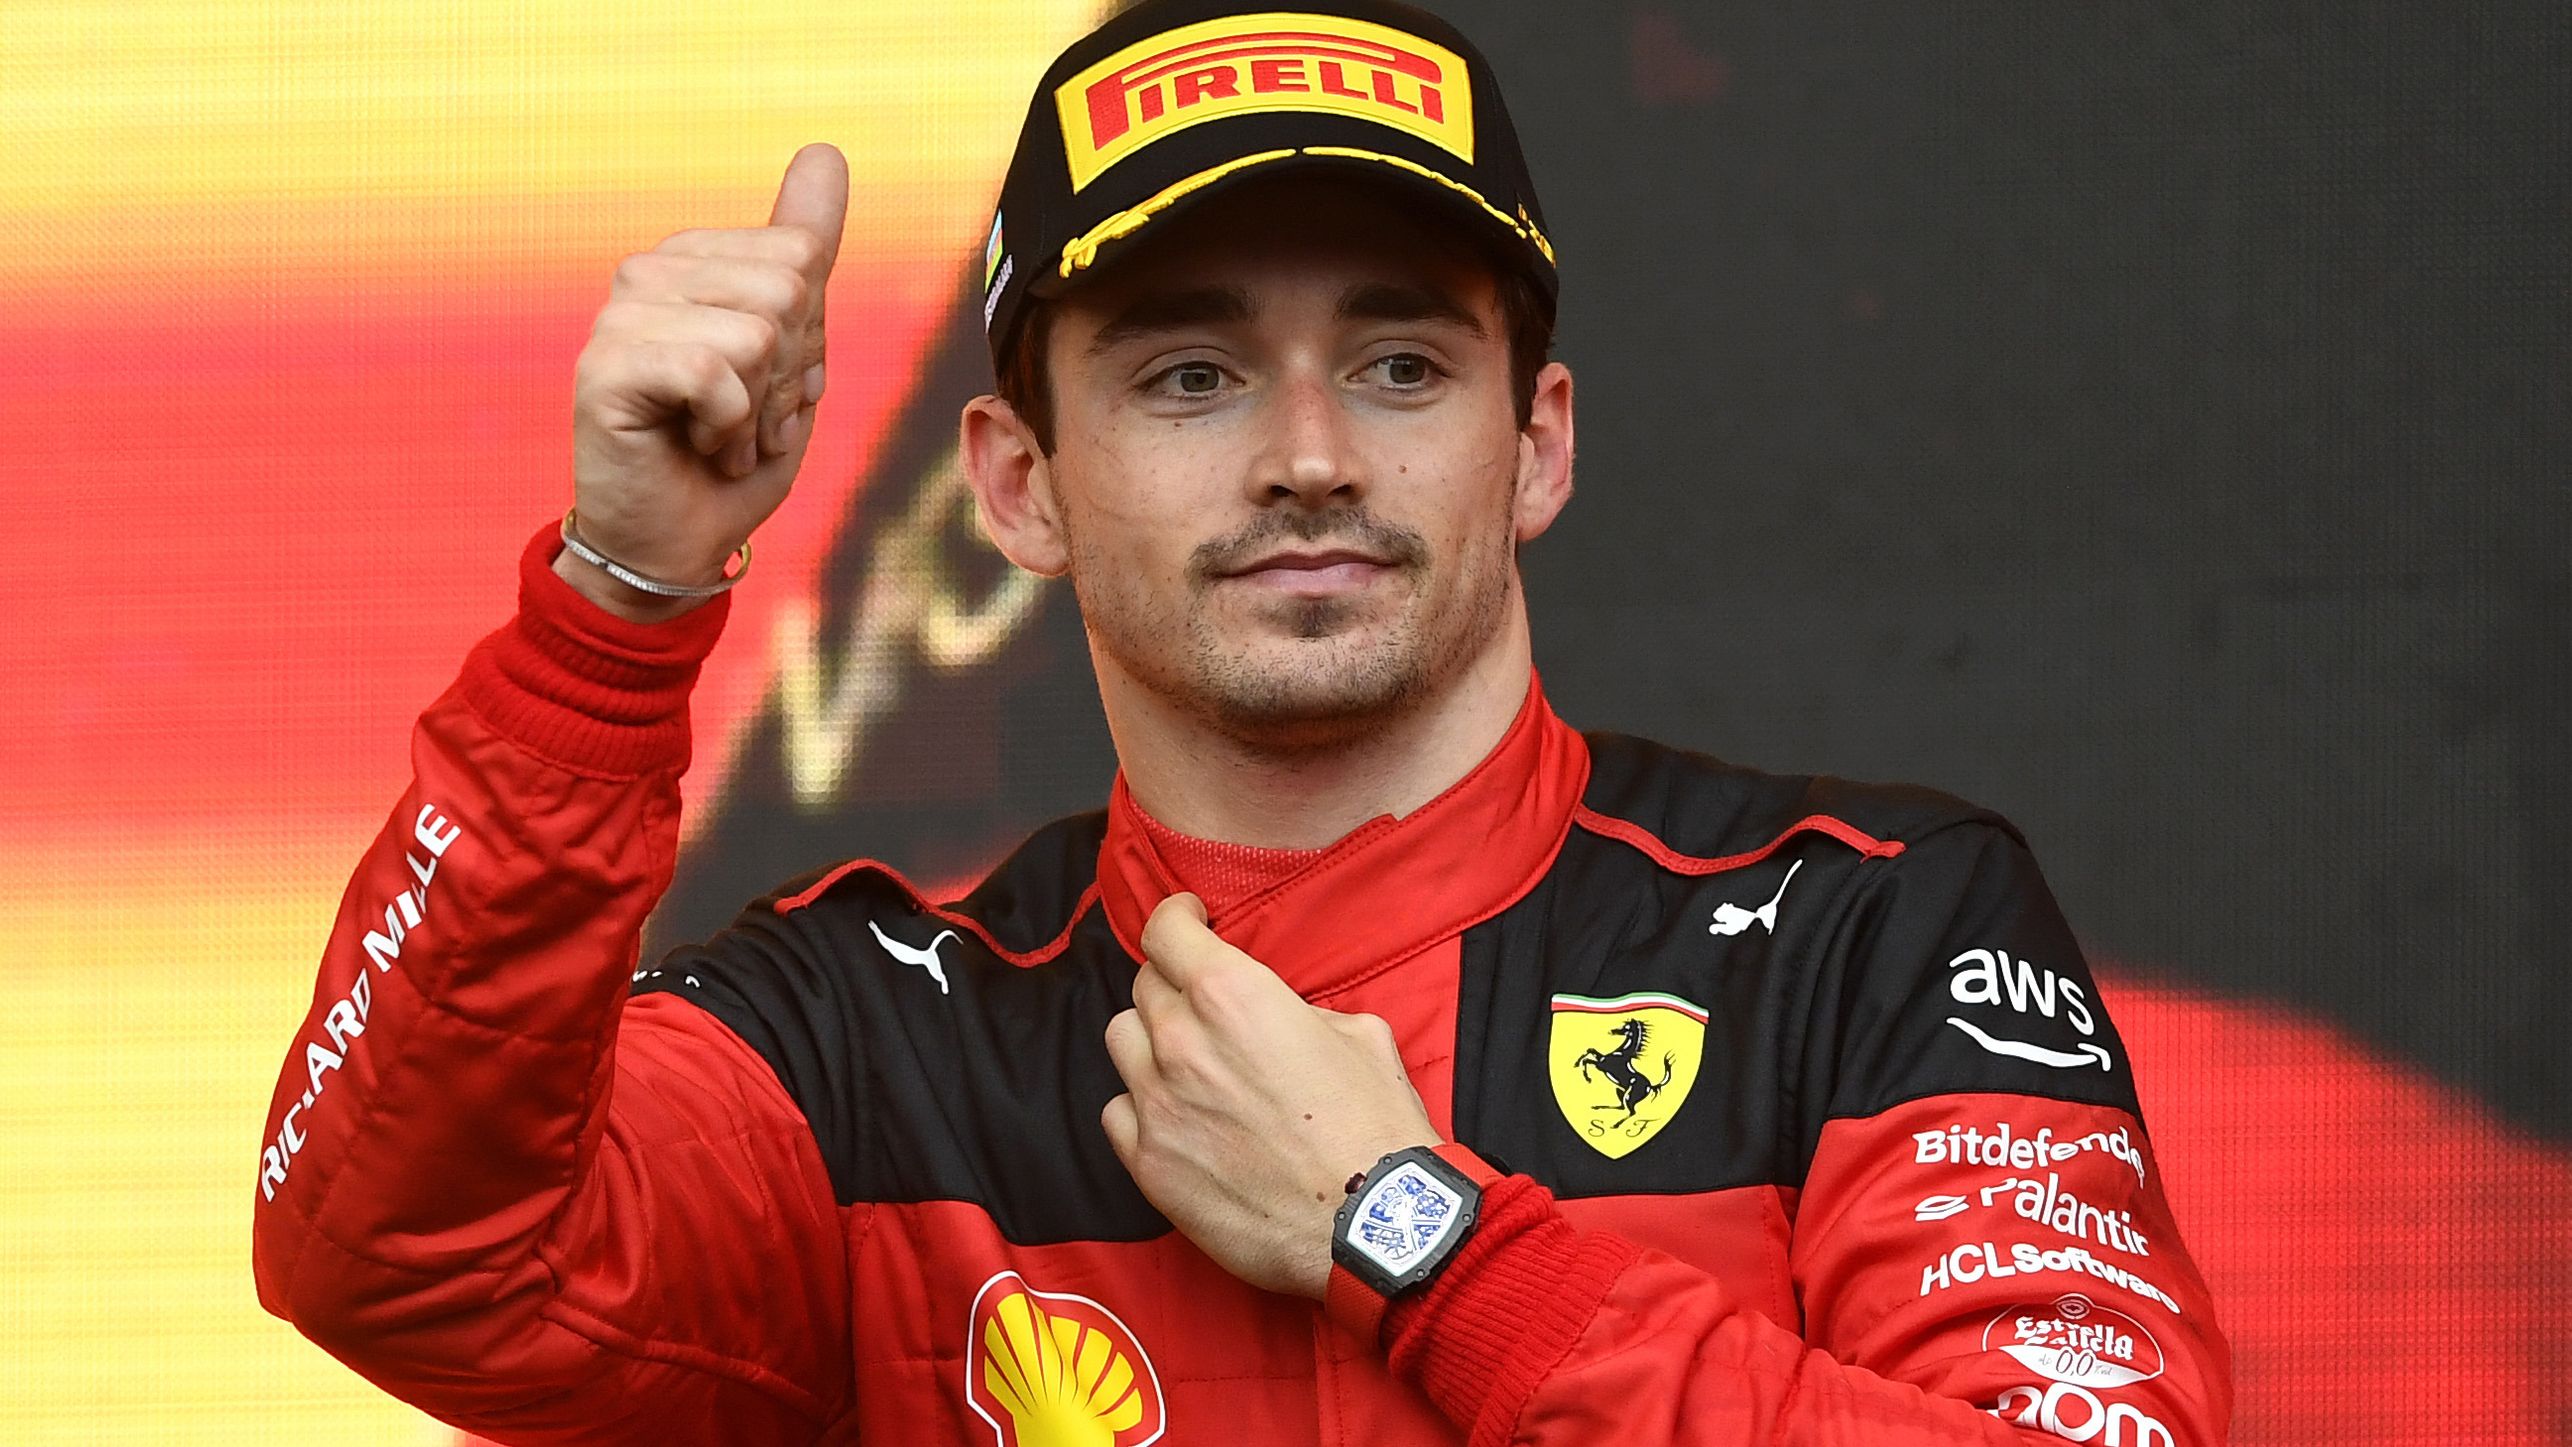 Charles Leclerc has signalled his interest in one day contesting the 24 Hours of Le Mans.